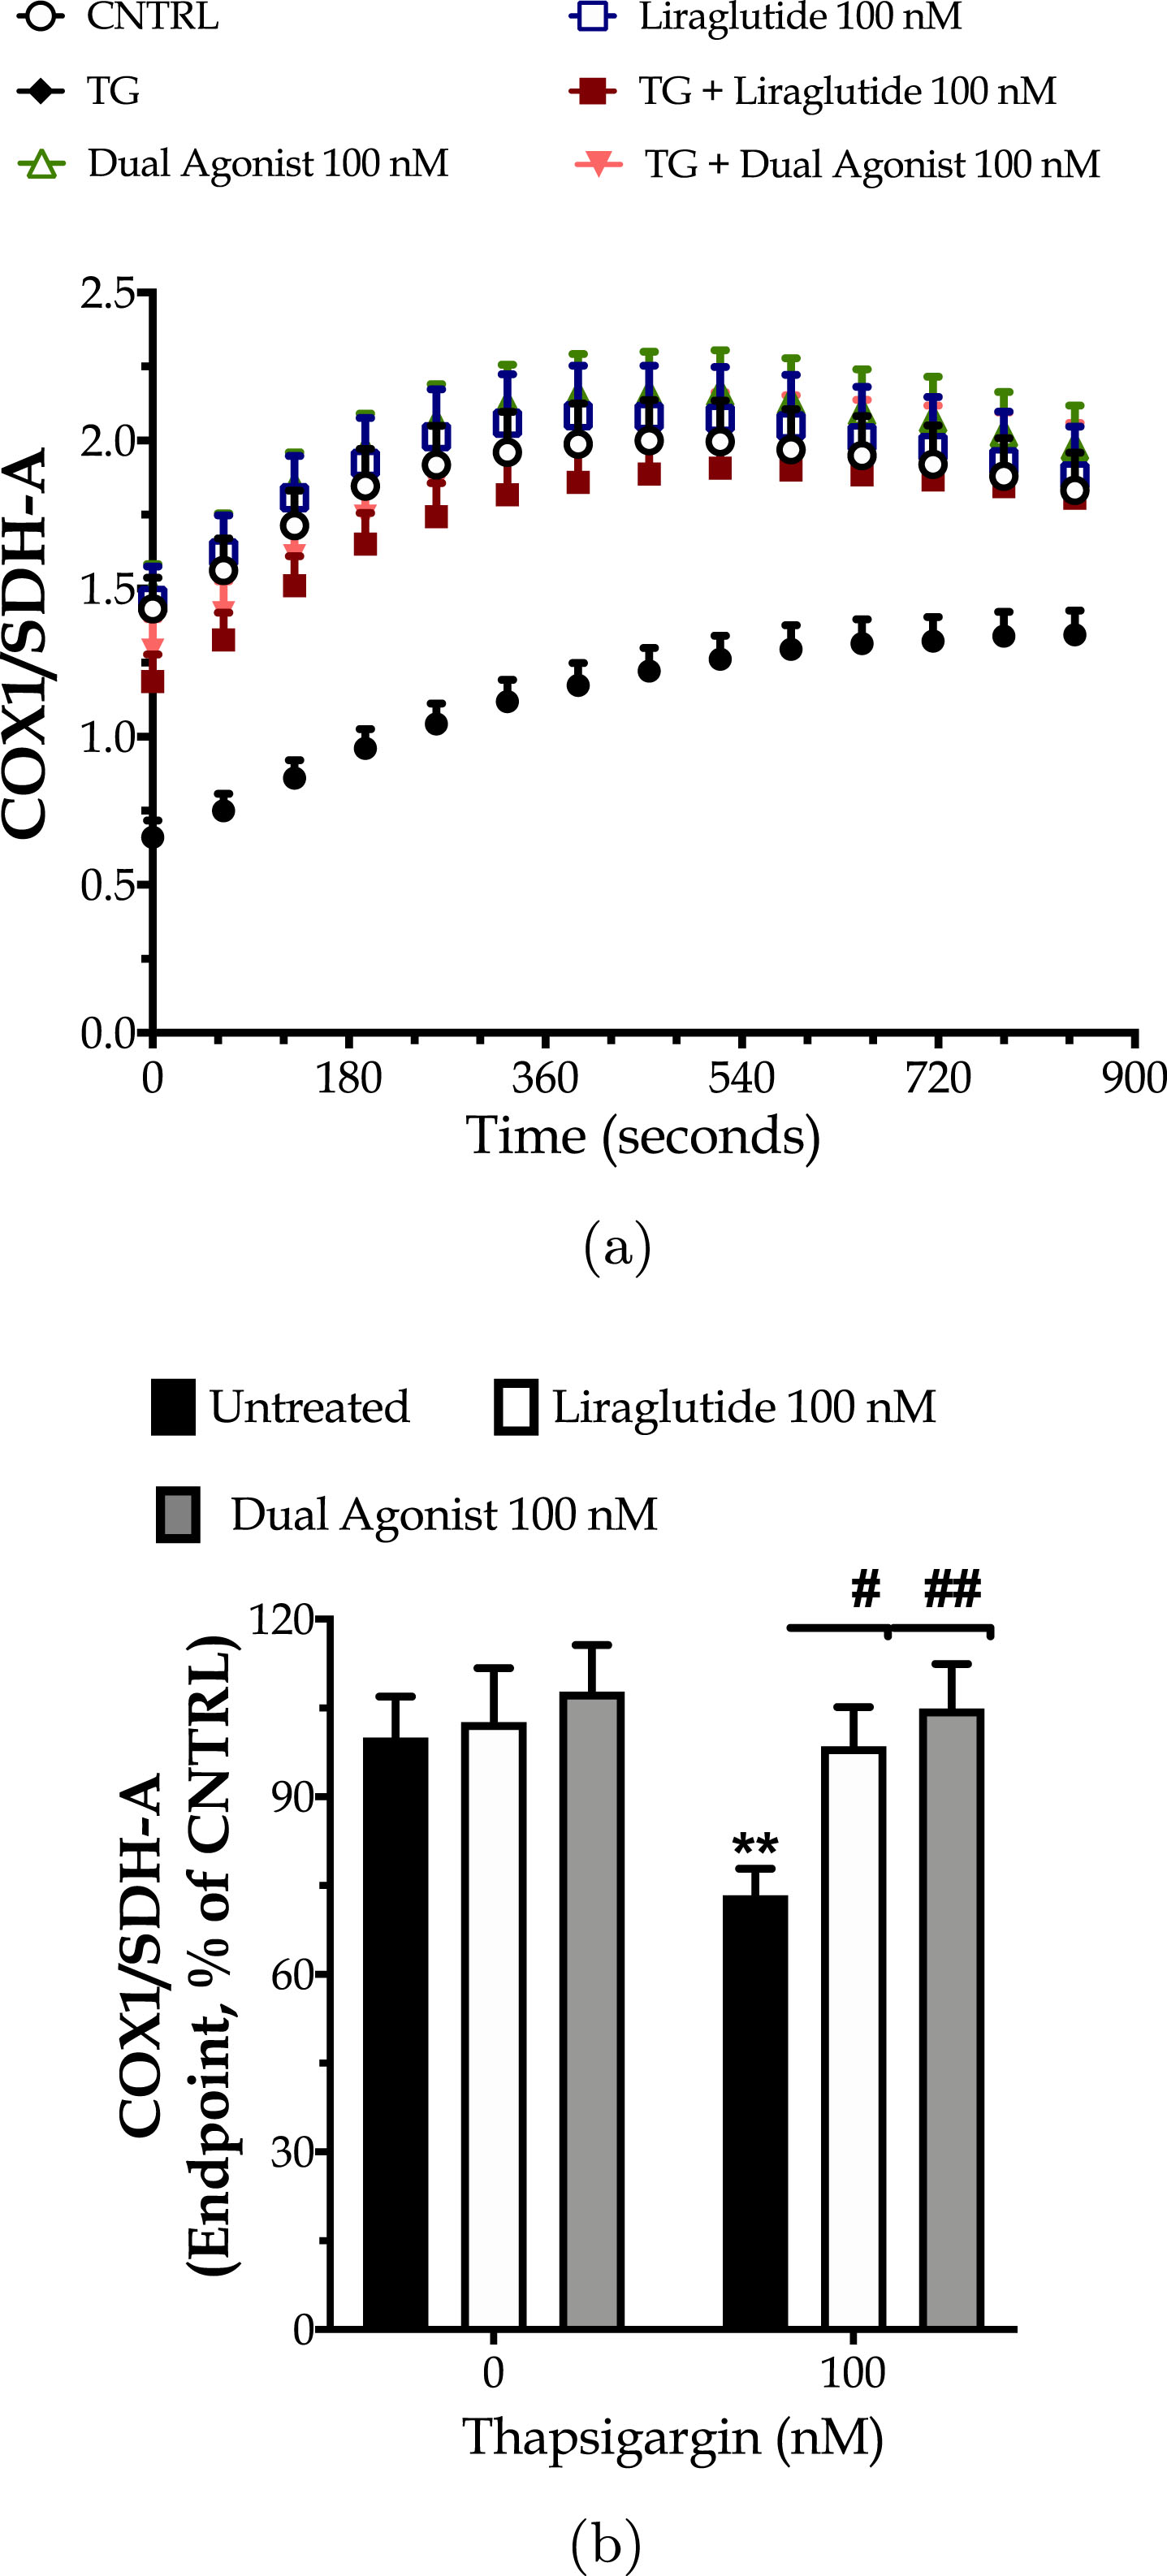 Liraglutide and the GLP-1/GIP dual agonist mitigate the impaired mitochondrial biogenesis following irreversible ER stress. On d 6 of the differentiation period, dopaminergic-like neurons from the human LUHMES cell line were treated with 0 and 100 nM of thapsigargin (TG) in the presence or absence of each incretin tested for 16 h. Neurons were fixed with 4% paraformaldehyde and monitored for the protein expression ratio of the cytochrome c oxidase subunit I (COX1; mitochondrial DNA-encoded protein) to the succinate dehydrogenase (SDH-A; nuclear DNA-encoded protein) over a kinetic cycle of 15 min for signal development with a colorimetric ELISA assay (a). Endpoint measurements of the ratio are expressed as percentages of the control (CNTRL; untreated/unstressed conditions) and illustrated as a bar graph (b). Each point and bar represent the mean±SEM from five independent experiments. Data processed with two-way ANOVA, followed by post hoc Bonferroni’s multiple comparison t-test: **p≤0.01 compared to the control (CNTRL; unstressed/untreated conditions); #p≤0.05 & ##p≤0.01 compared to the TG-stressed neurons.